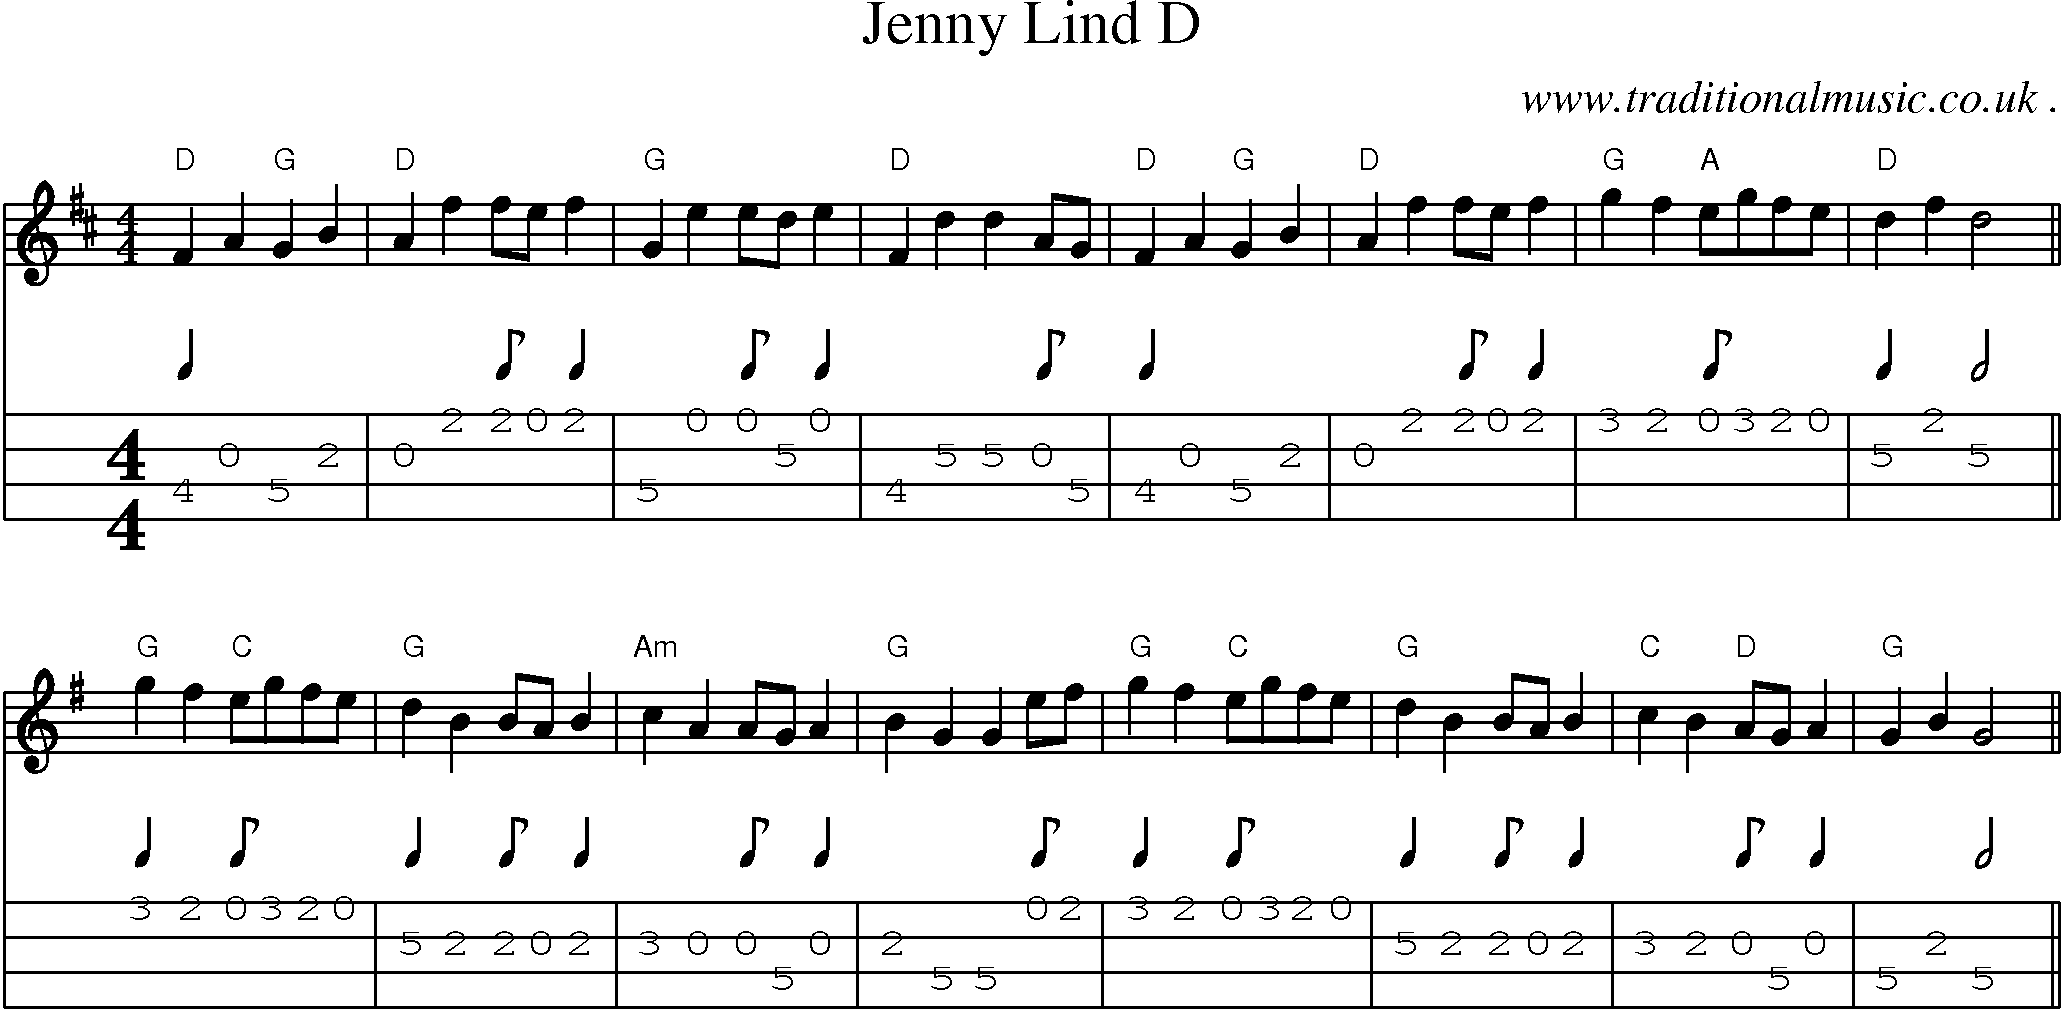 Music Score and Mandolin Tabs for Jenny Lind D